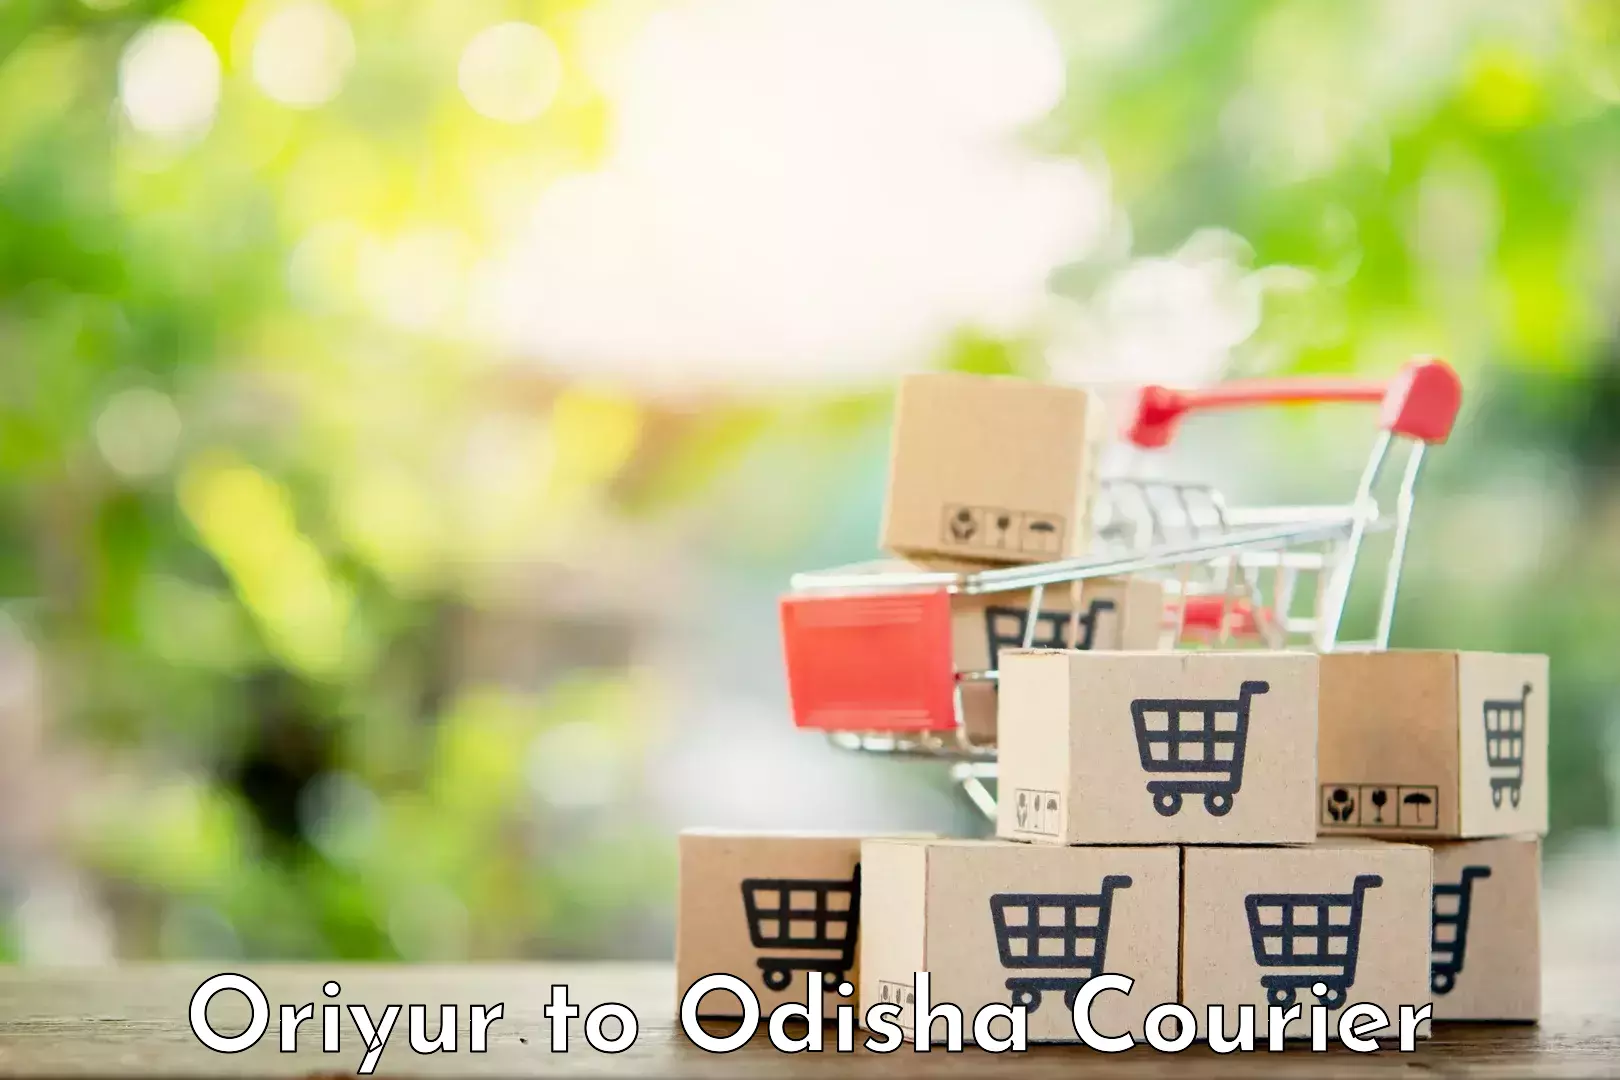 Full-service courier options Oriyur to Jeypore